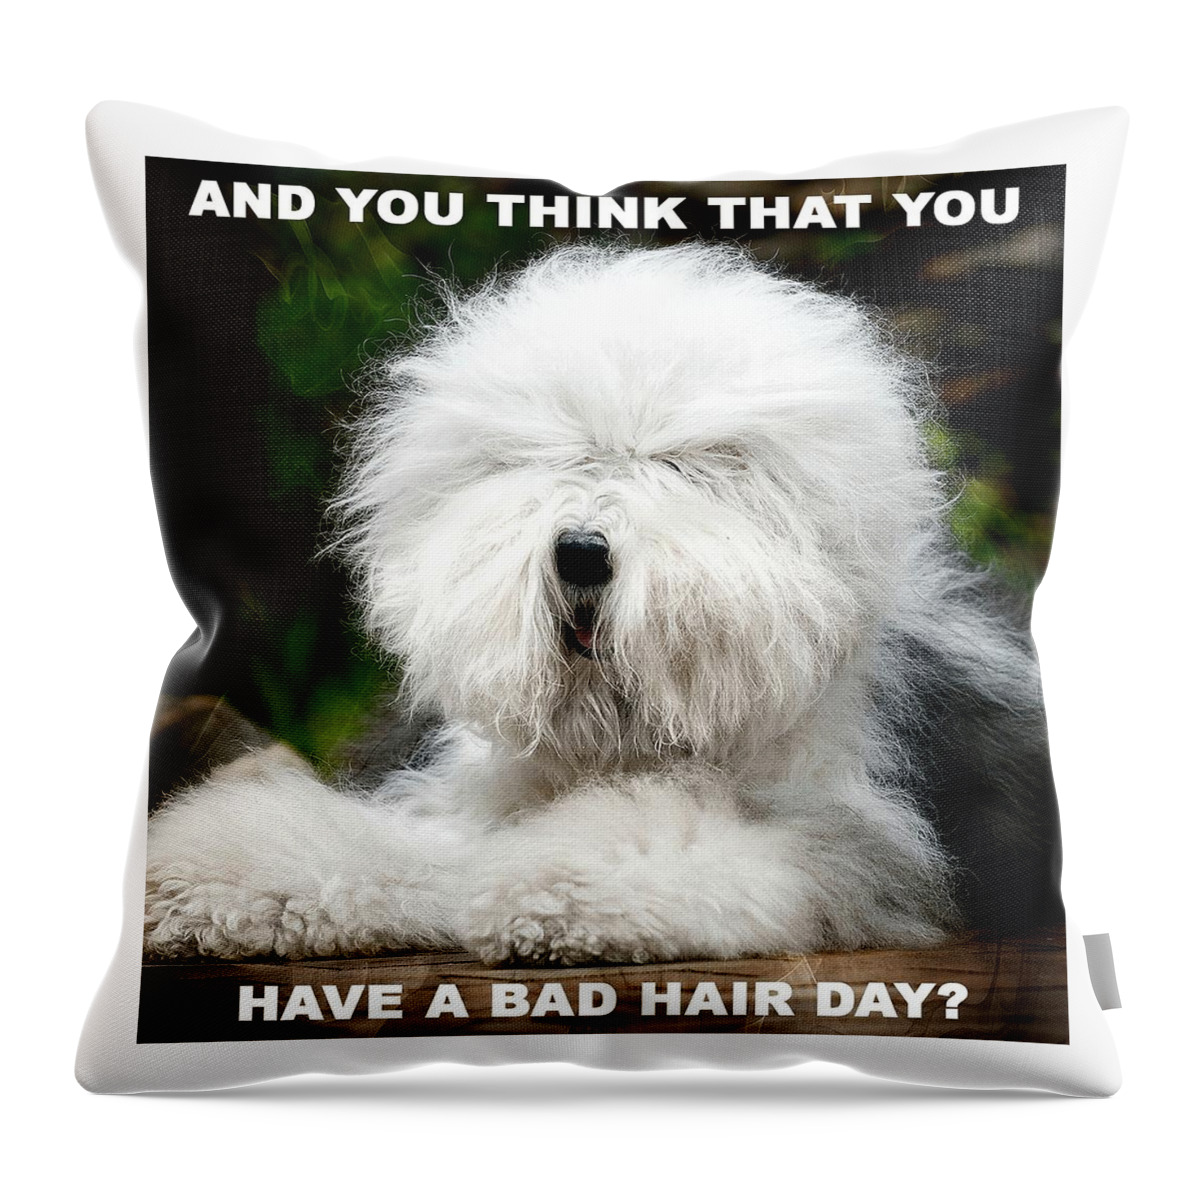 Animal Throw Pillow featuring the photograph Shaggy Dog With Bad Hair Day by Michelle Liebenberg